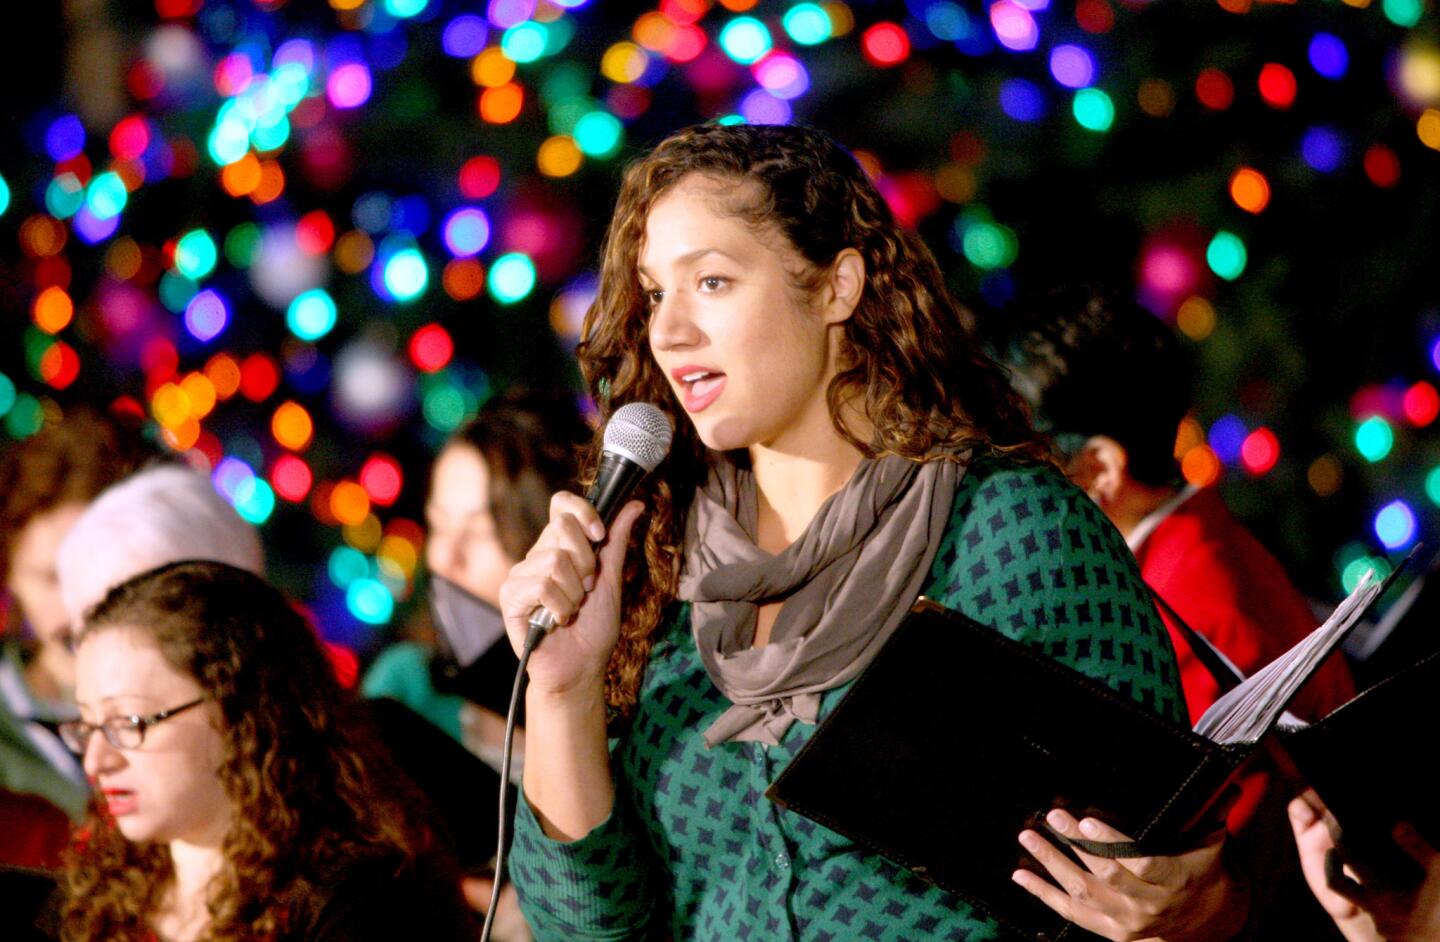 Erica McNeil and the rest of the Nestlé Choir sang Christmas songs at the tree lighting ceremony at Perkins Plaza in Glendale on Wednesday, Dec. 2, 2015.